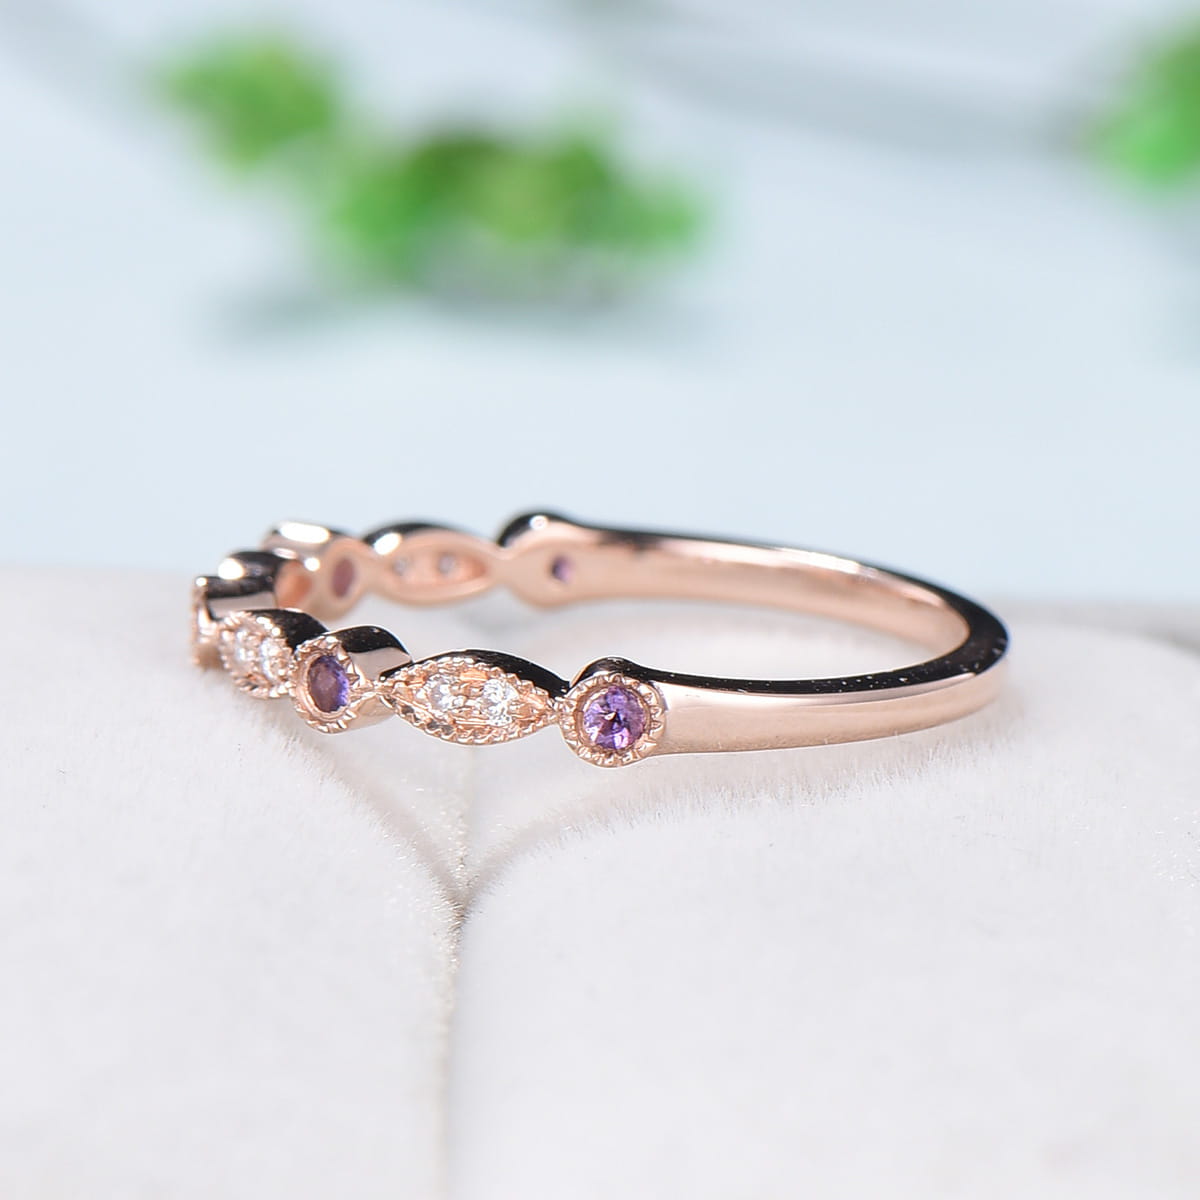 Vintage Amethyst Diamond Wedding Band Rose Gold Half Eternity Milgrain Stacking Band Anniversary Ring Matching Band Art Deco Marquise Ring - PENFINE